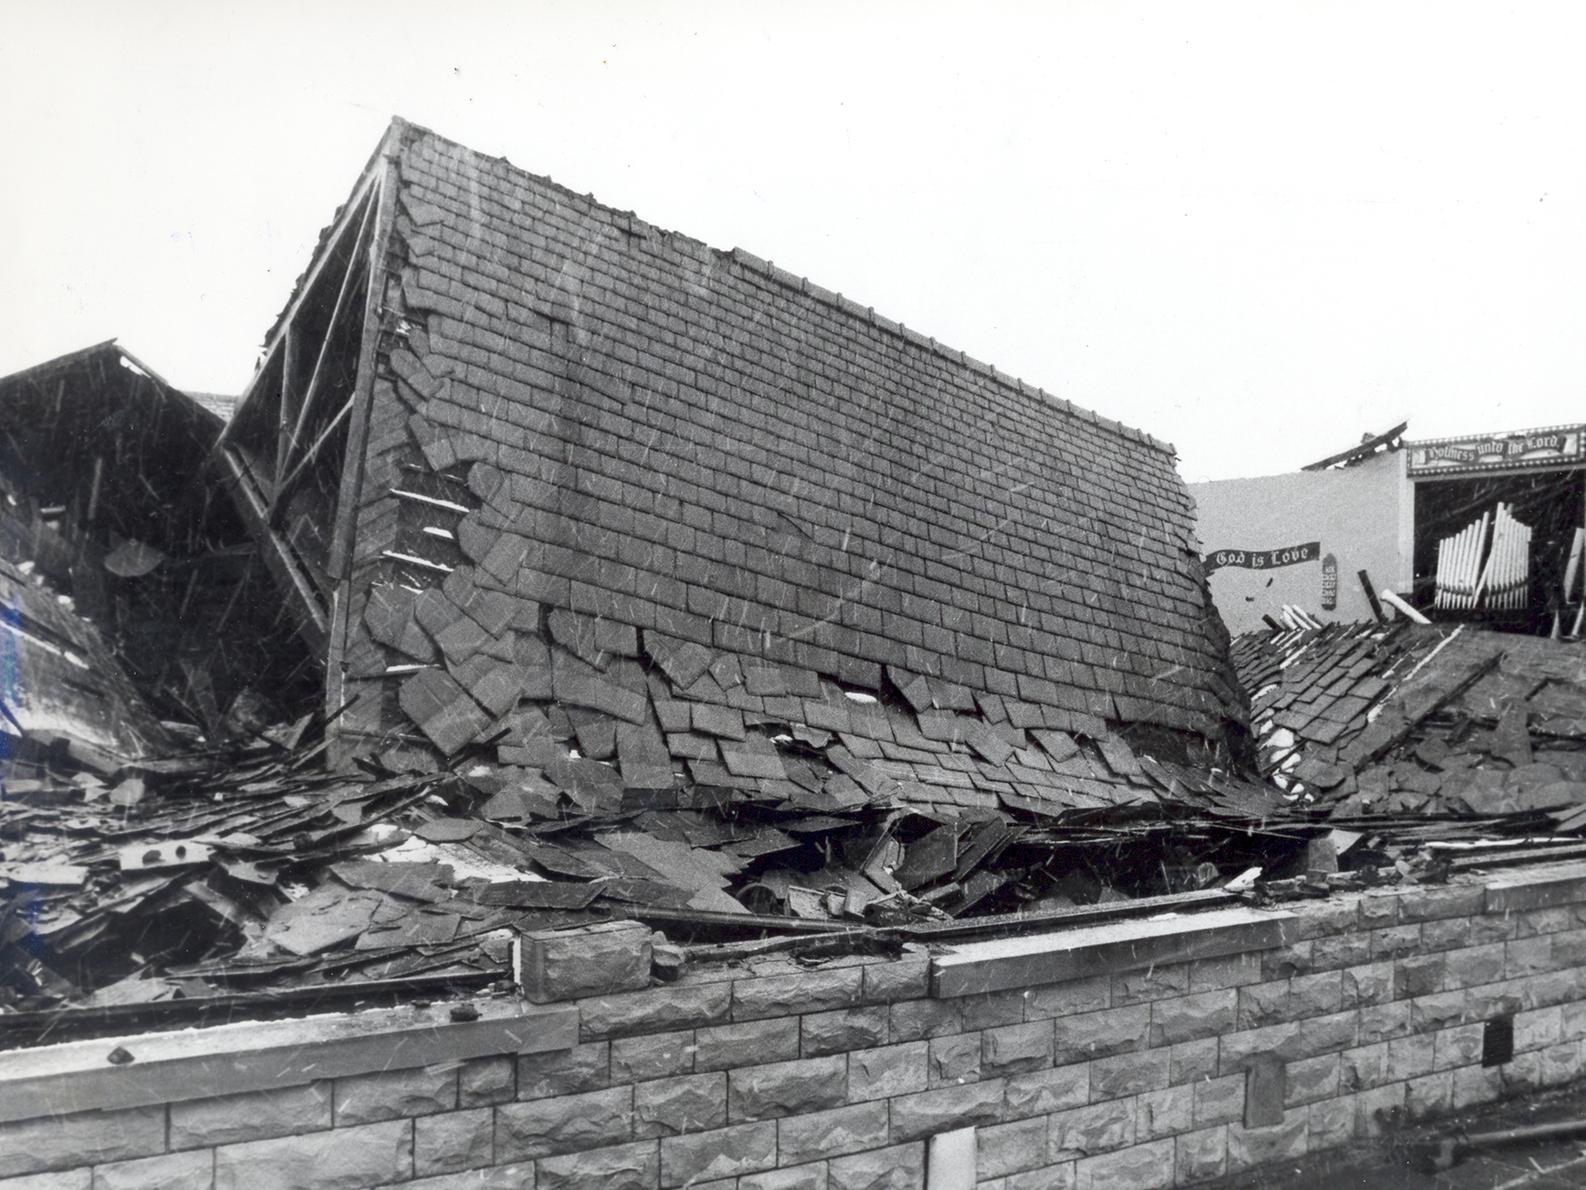 A woman told of her lucky escape when a freak gust of wind ripped the roof of the Church of the Nazarene on Albion Street, showering her in debris.